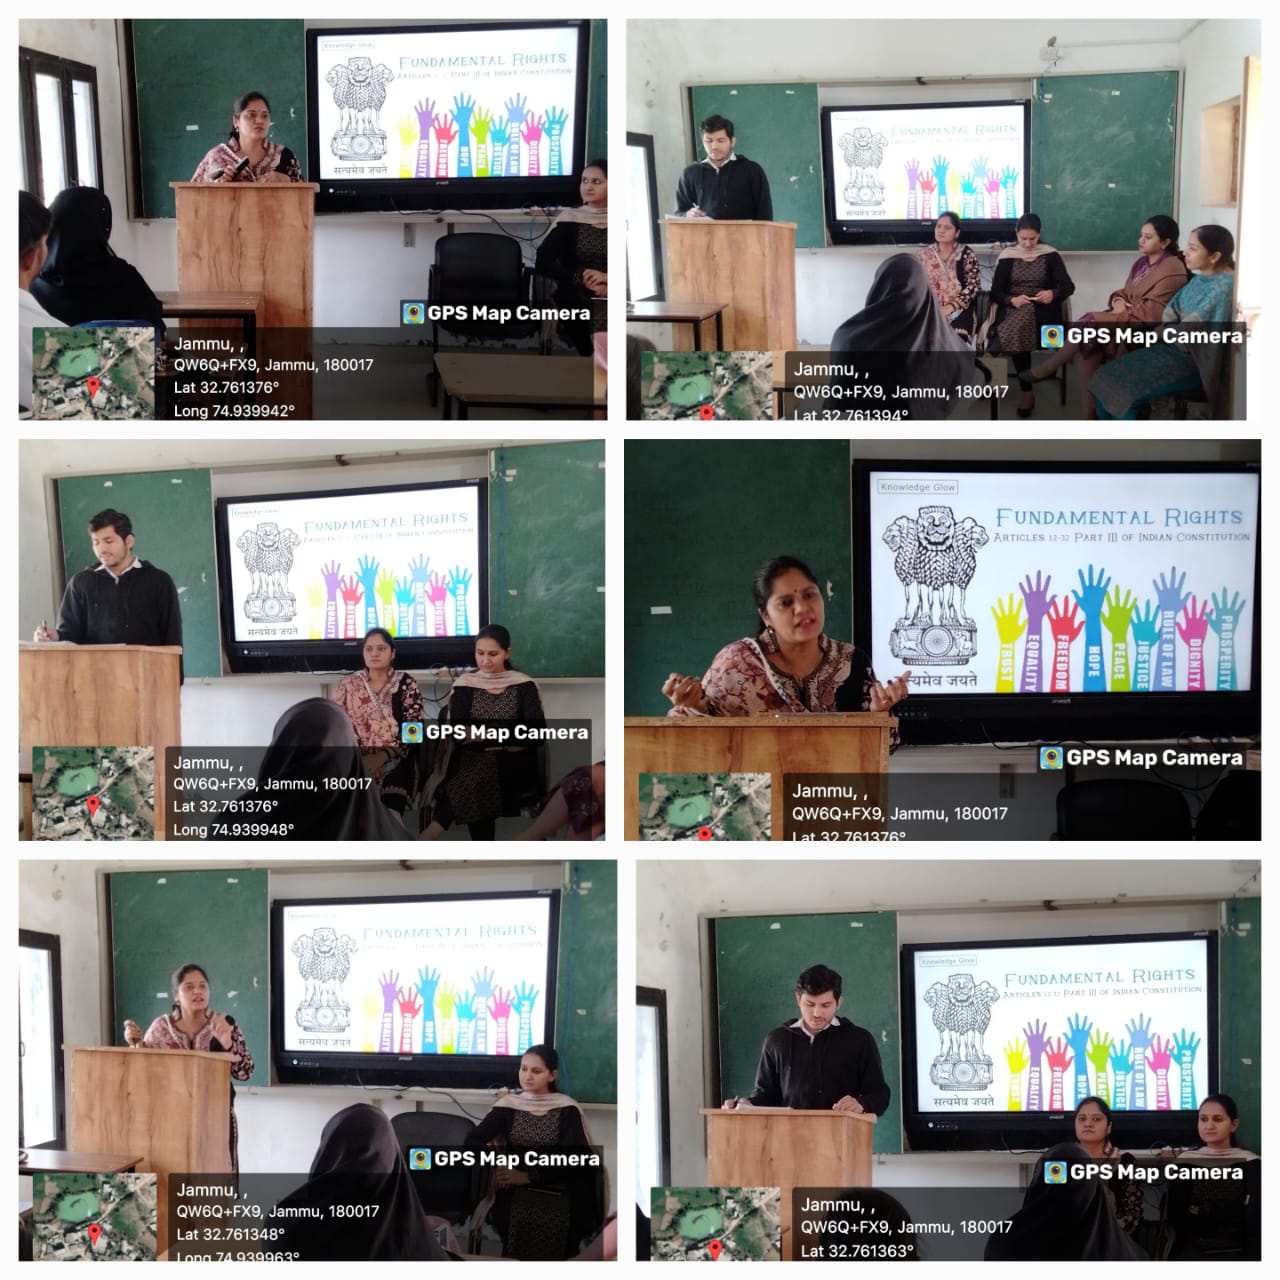 GDC Sidhra organised a speech on the “Awareness on Funadamental Rights”